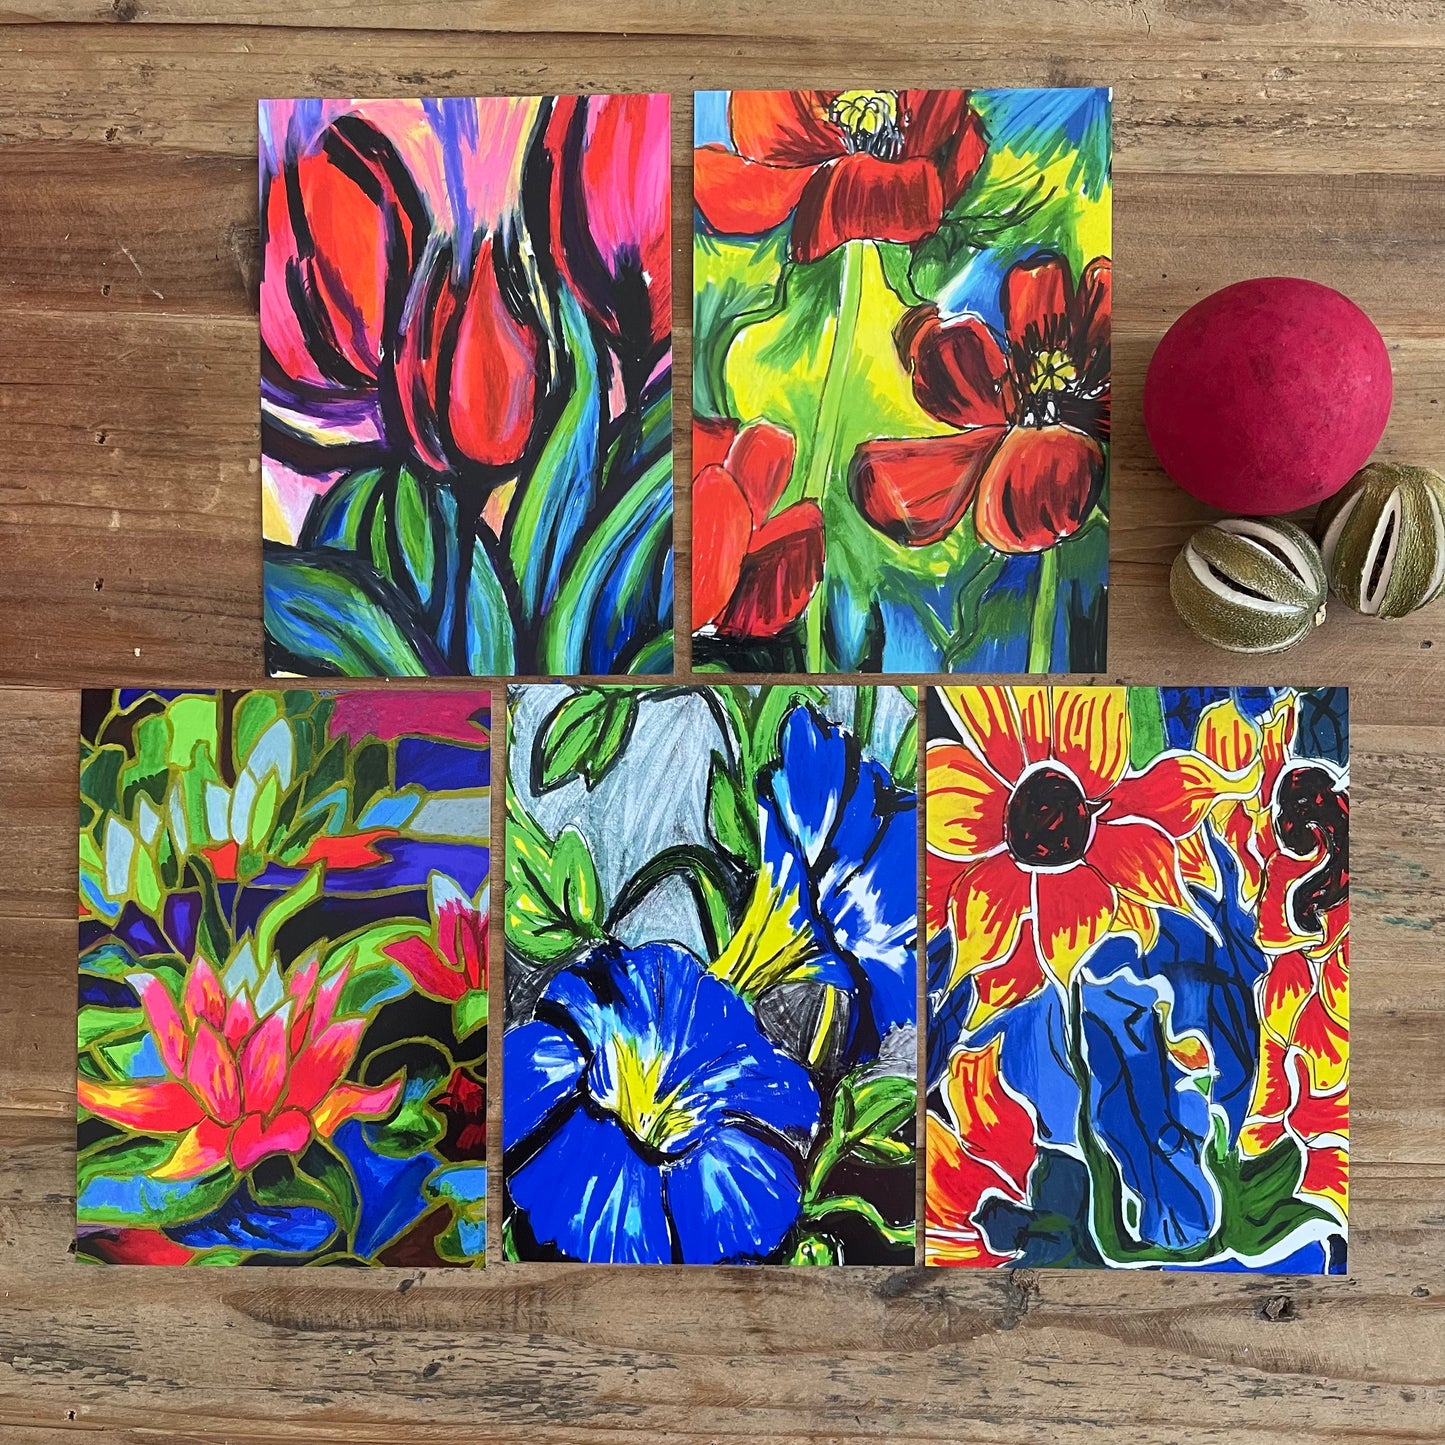 Flowers - Set of 5 prints 5x7" for $25 - Vichy's Art